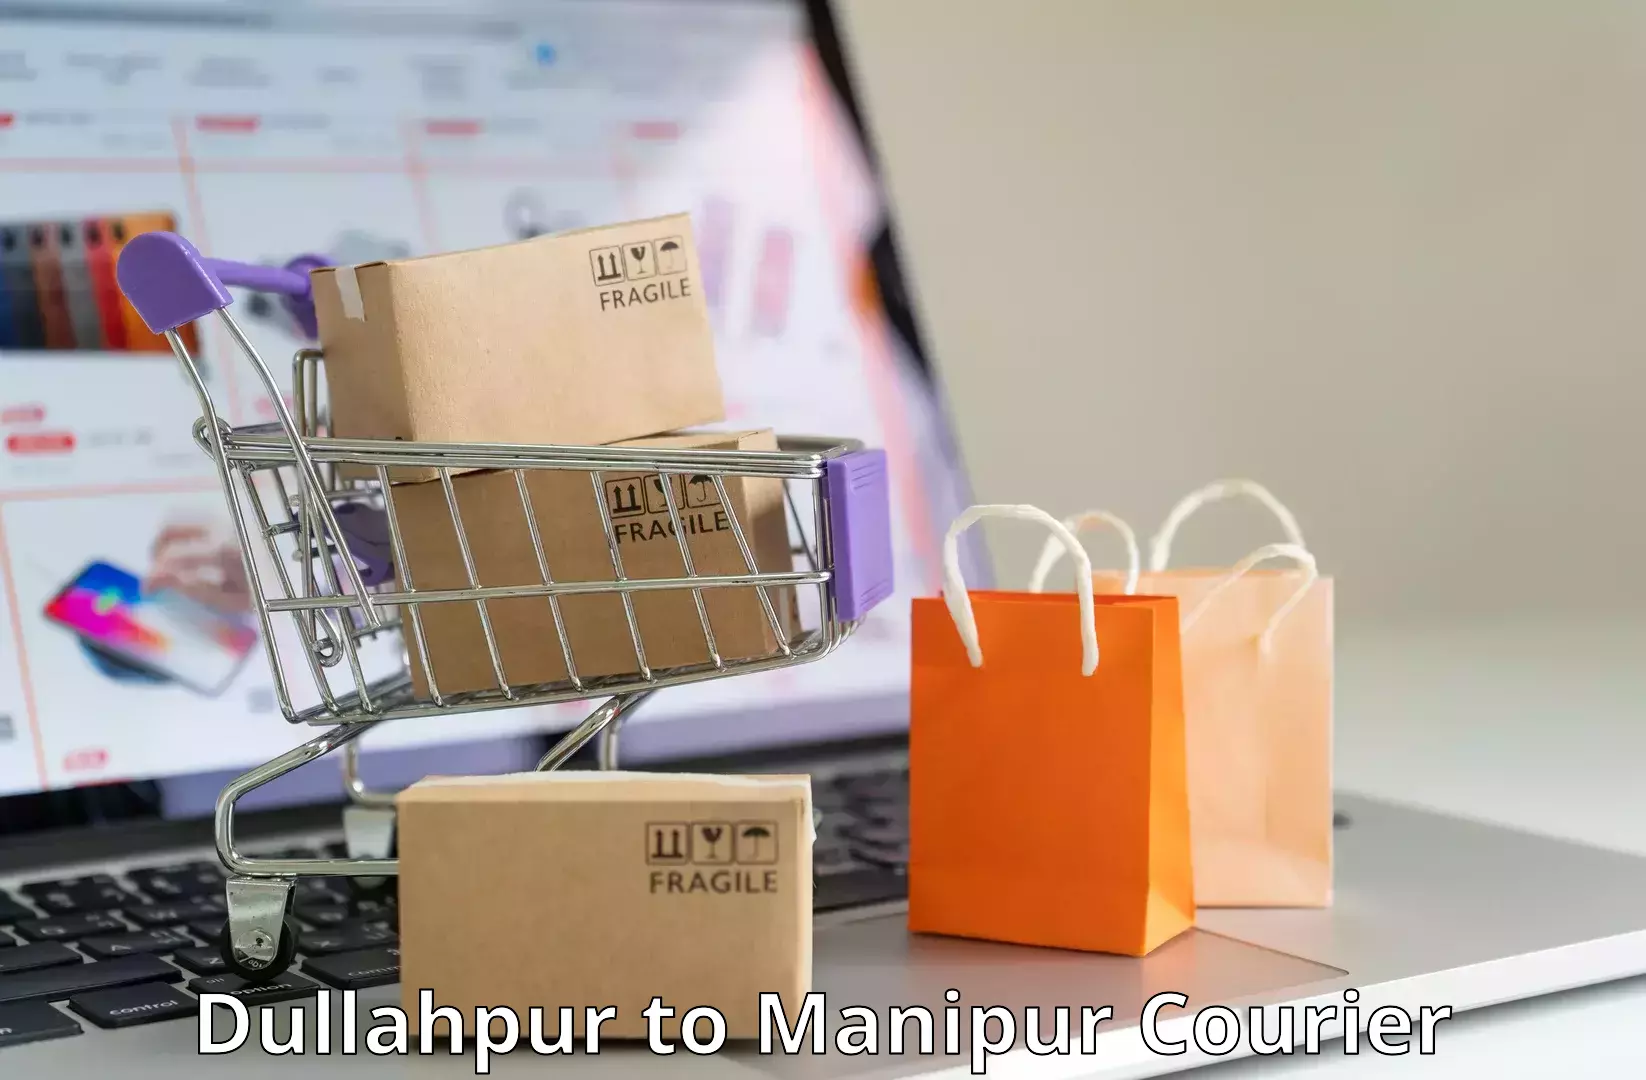 Residential courier service Dullahpur to Manipur